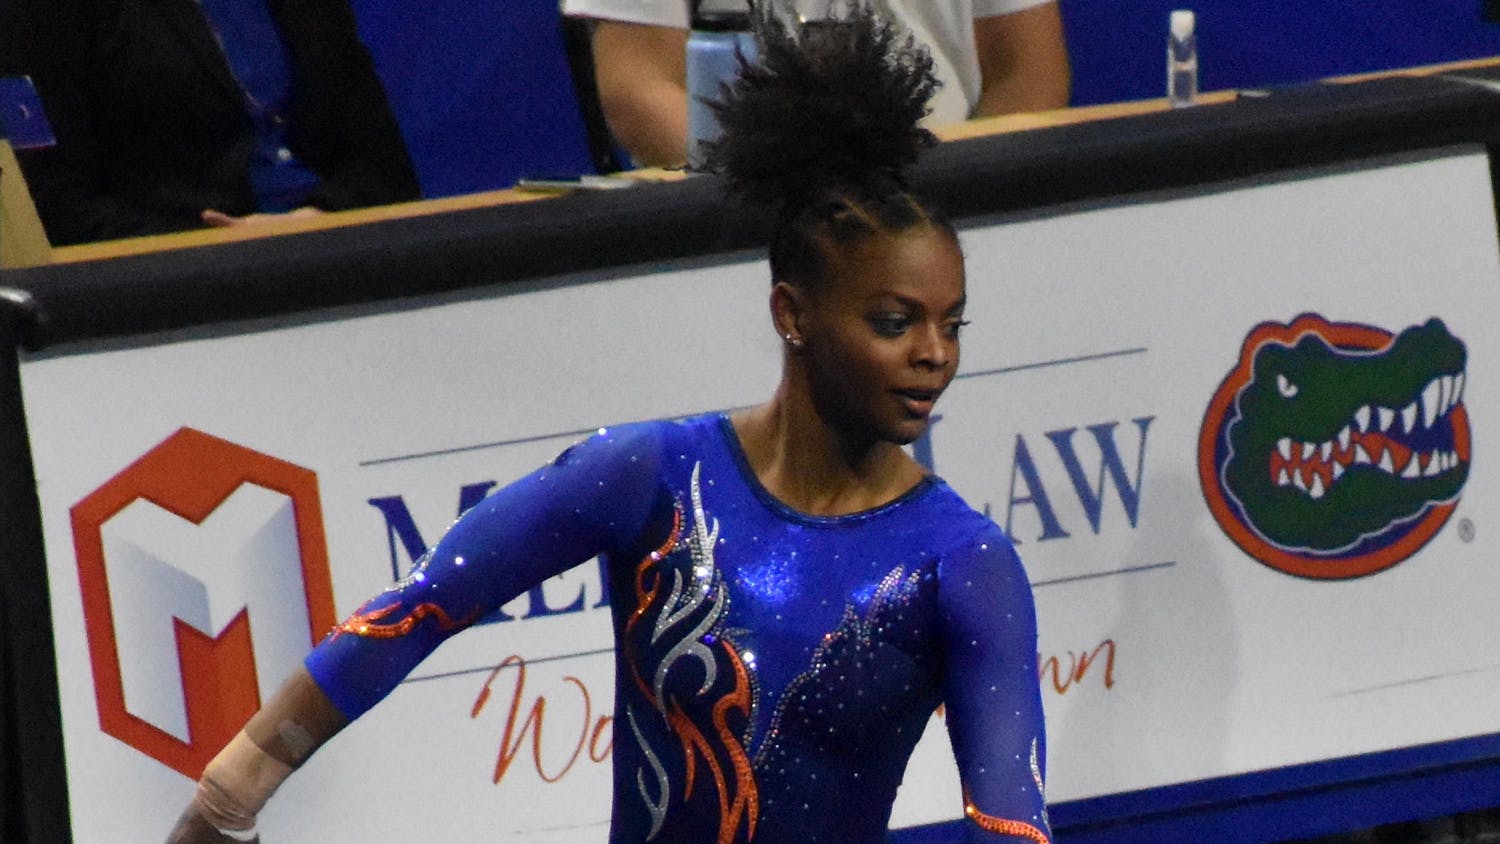 Star gymnast Trinity Thomas may perform in the bars lineup in the upcoming NCAA Regionals. Photo from UF-Mizzou meet Jan. 29.